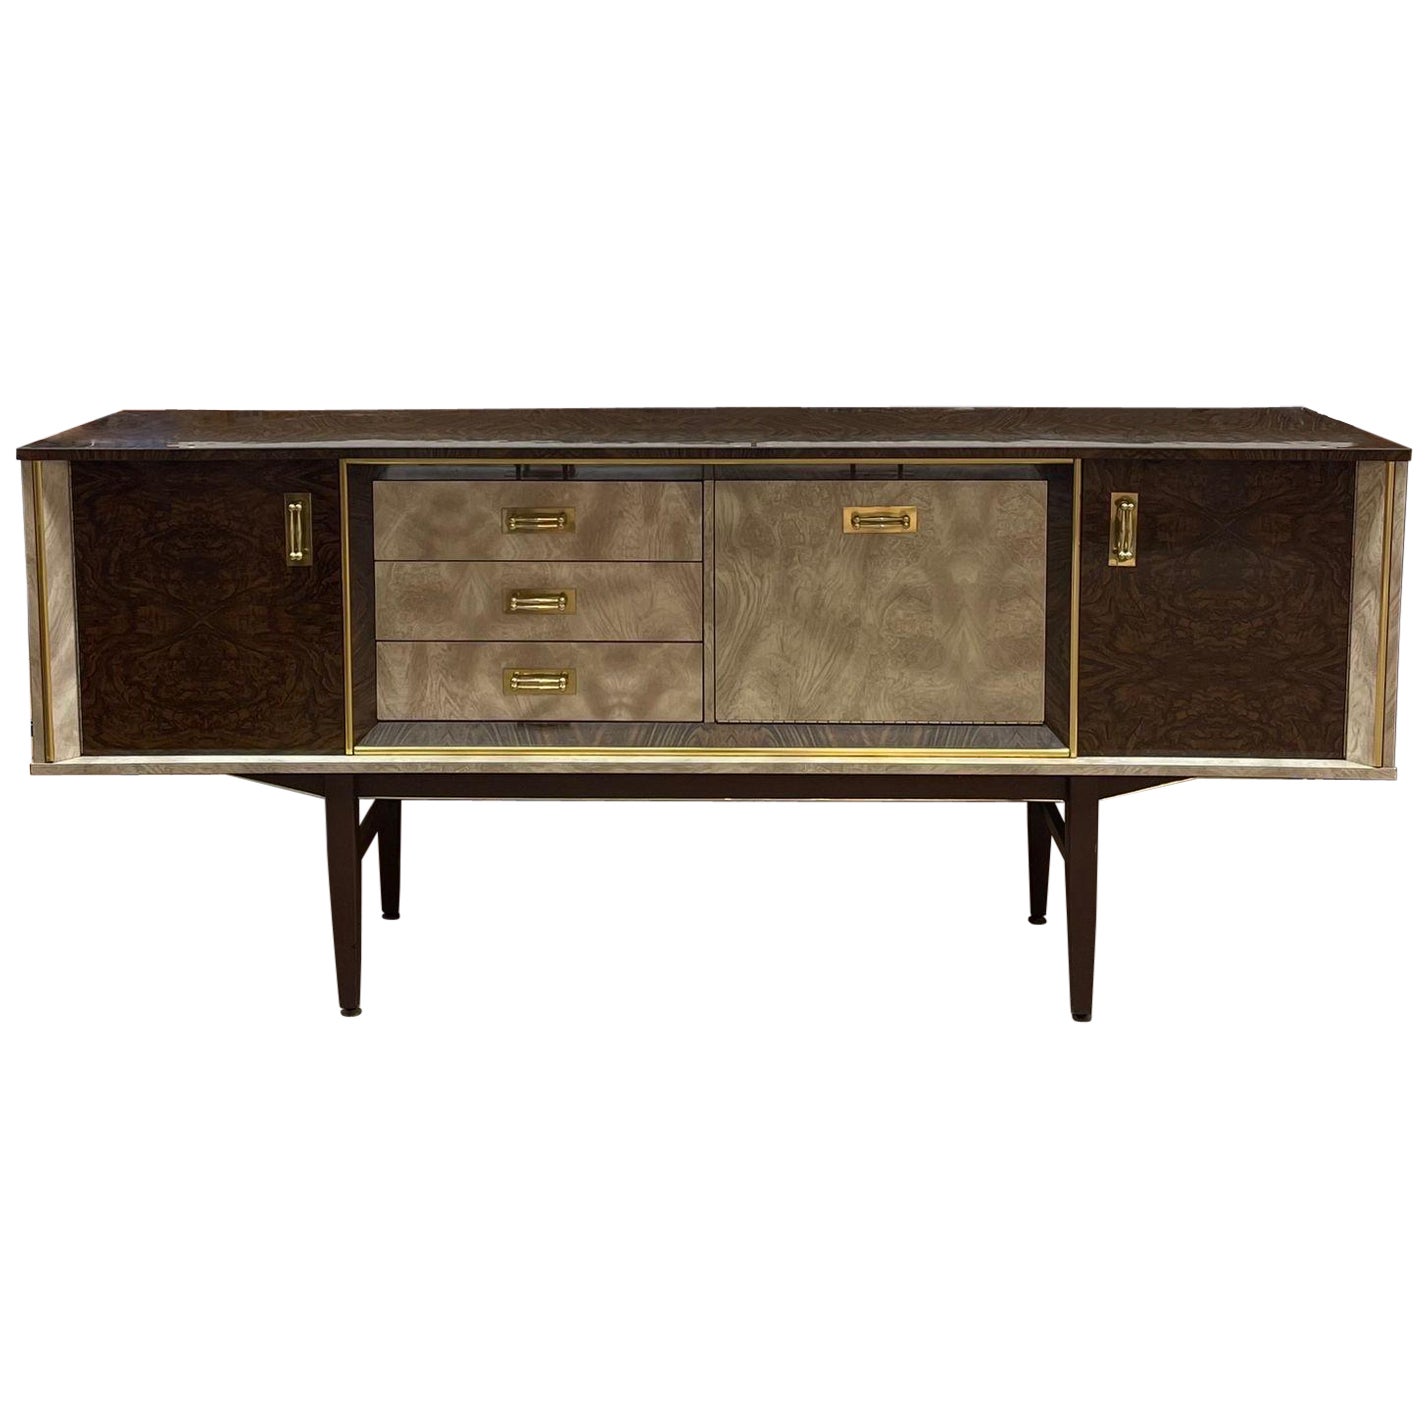 Vintage Retro Uk Import Two Toned Formica Credenza With Gold Accents. For Sale